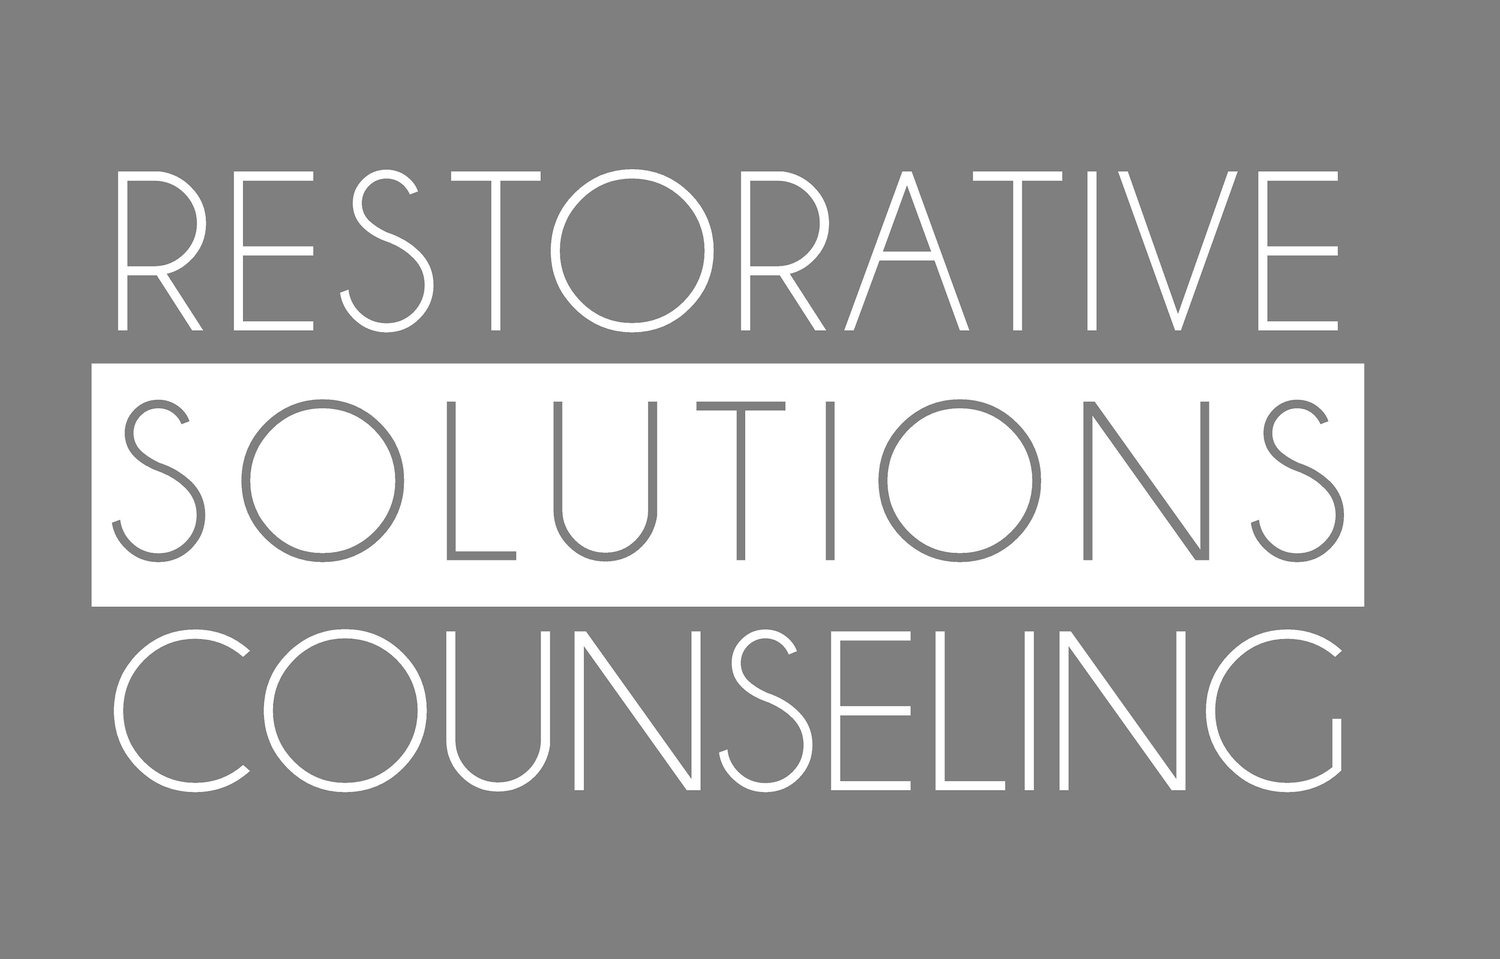 Restorative Solutions Counseling